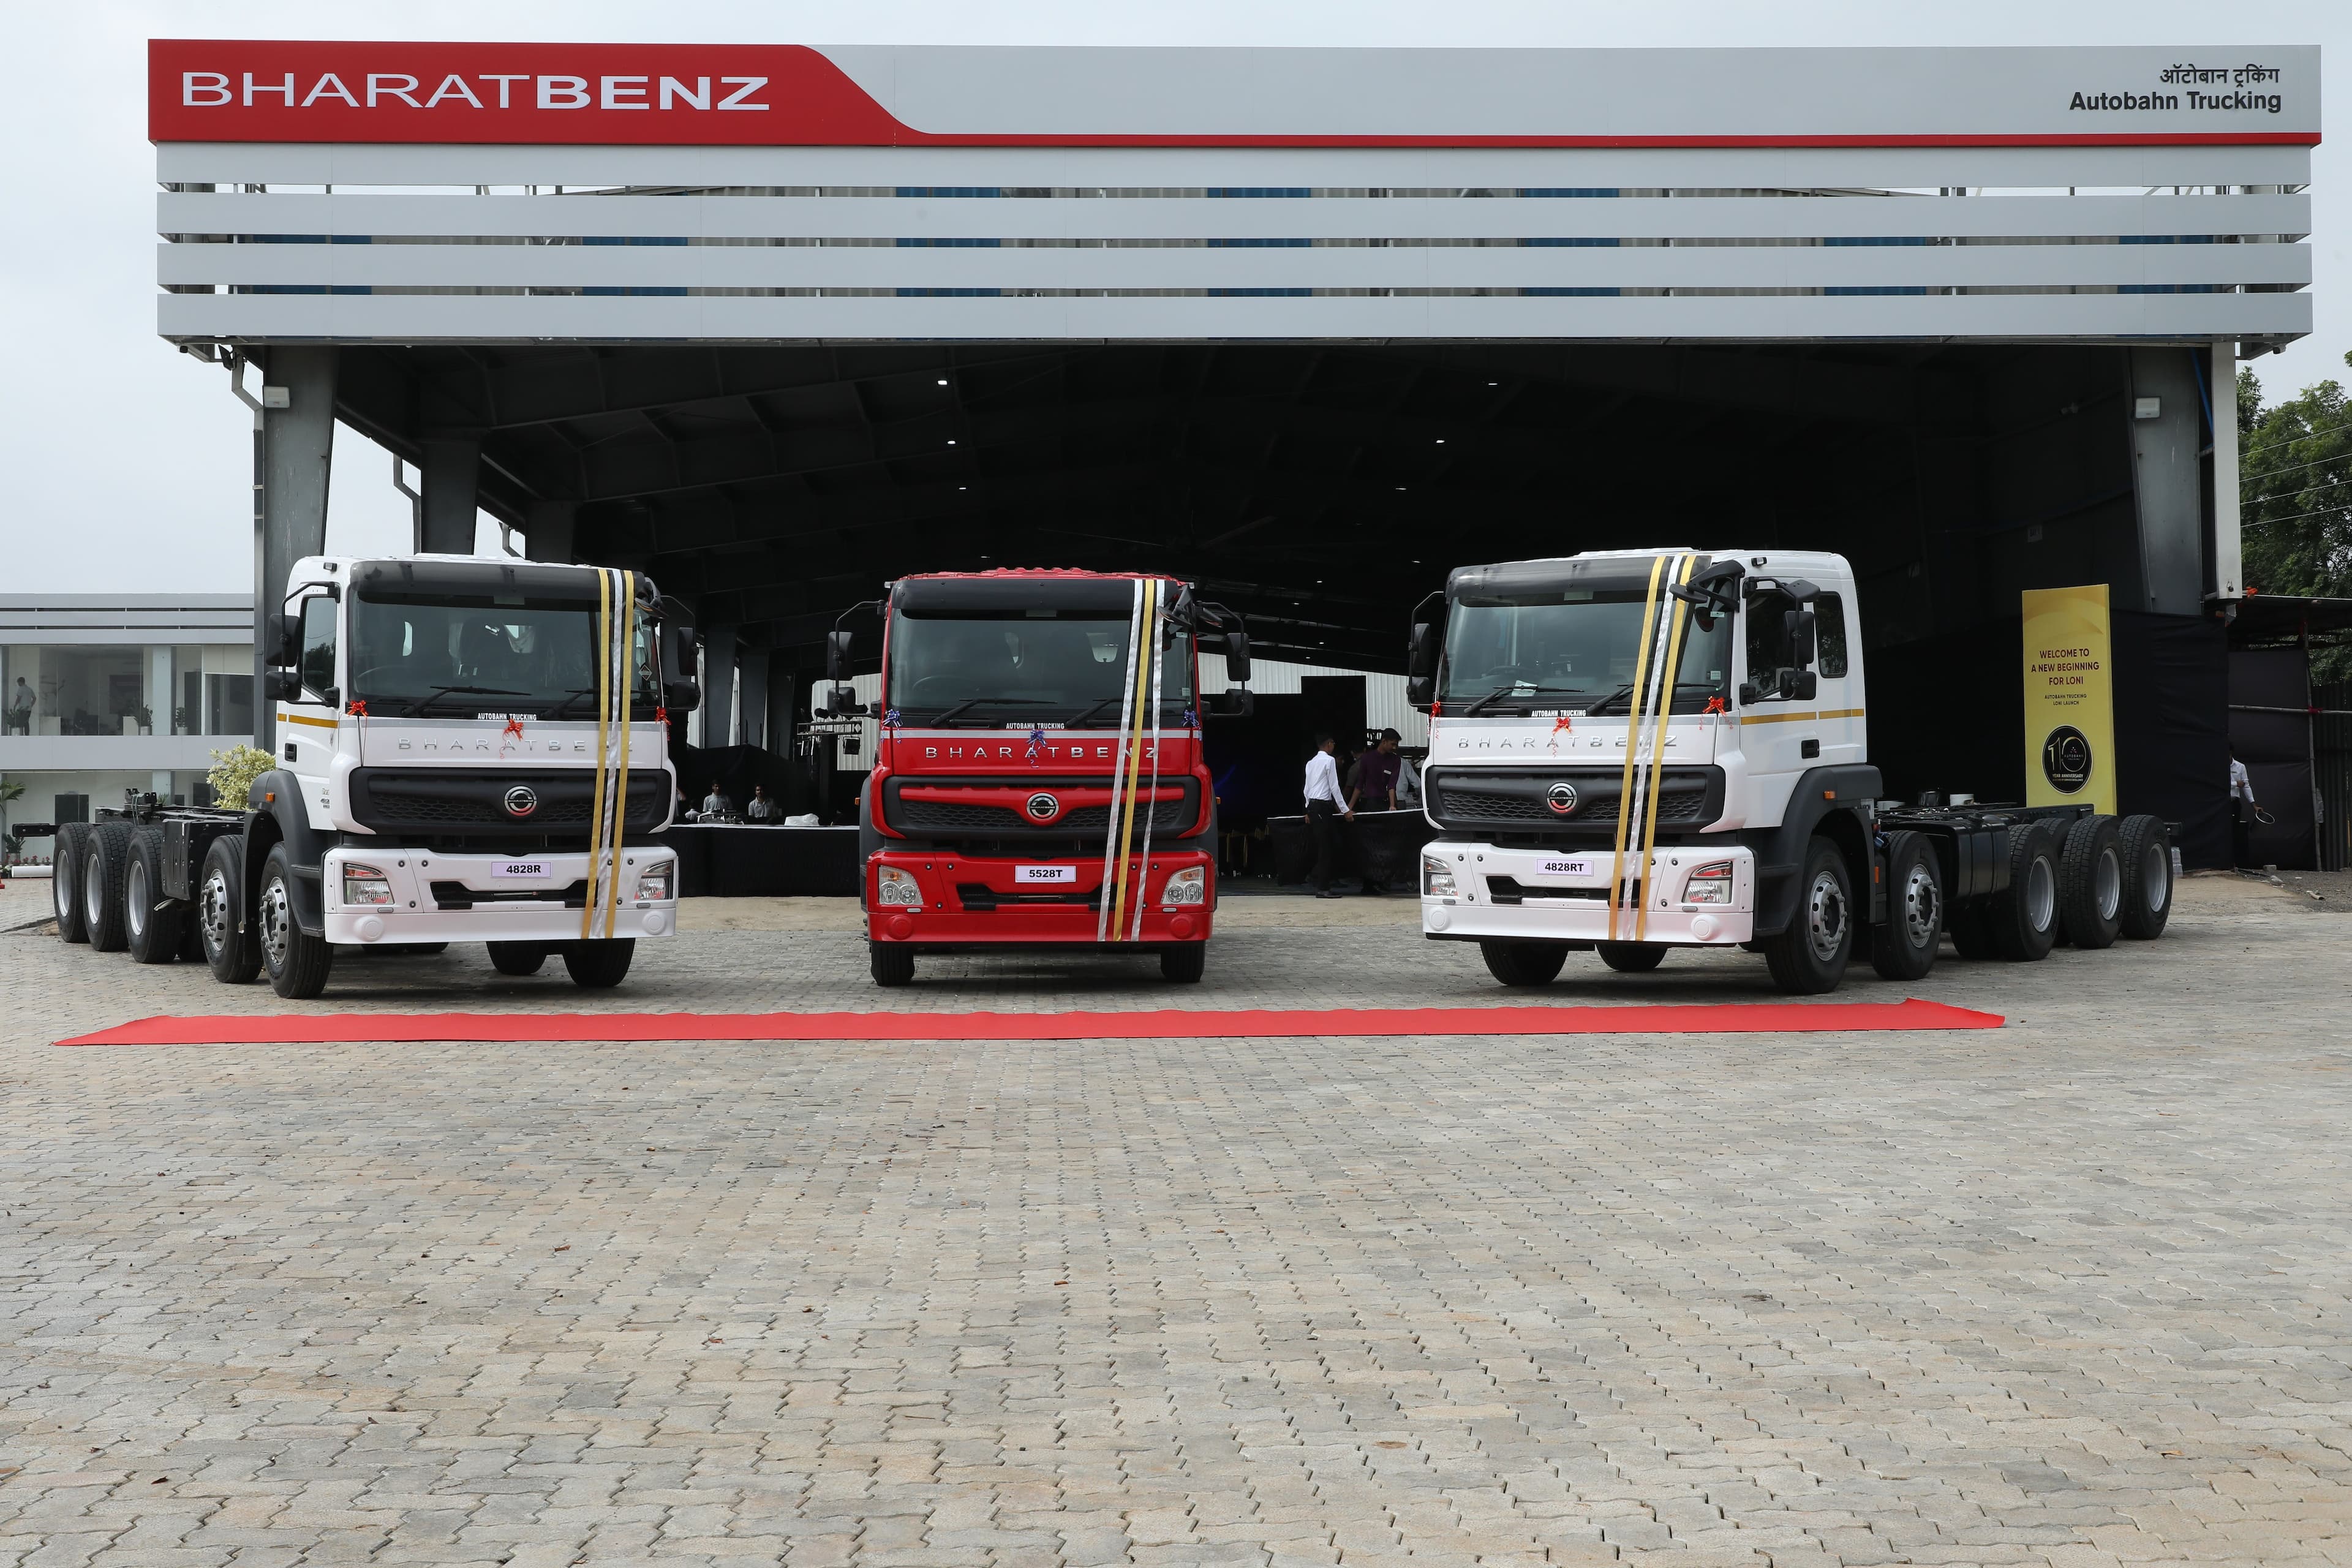 Daimler India Commercial Vehicle inaugurated its 300th BharatBenz showroom in Loni, Maharashtra.